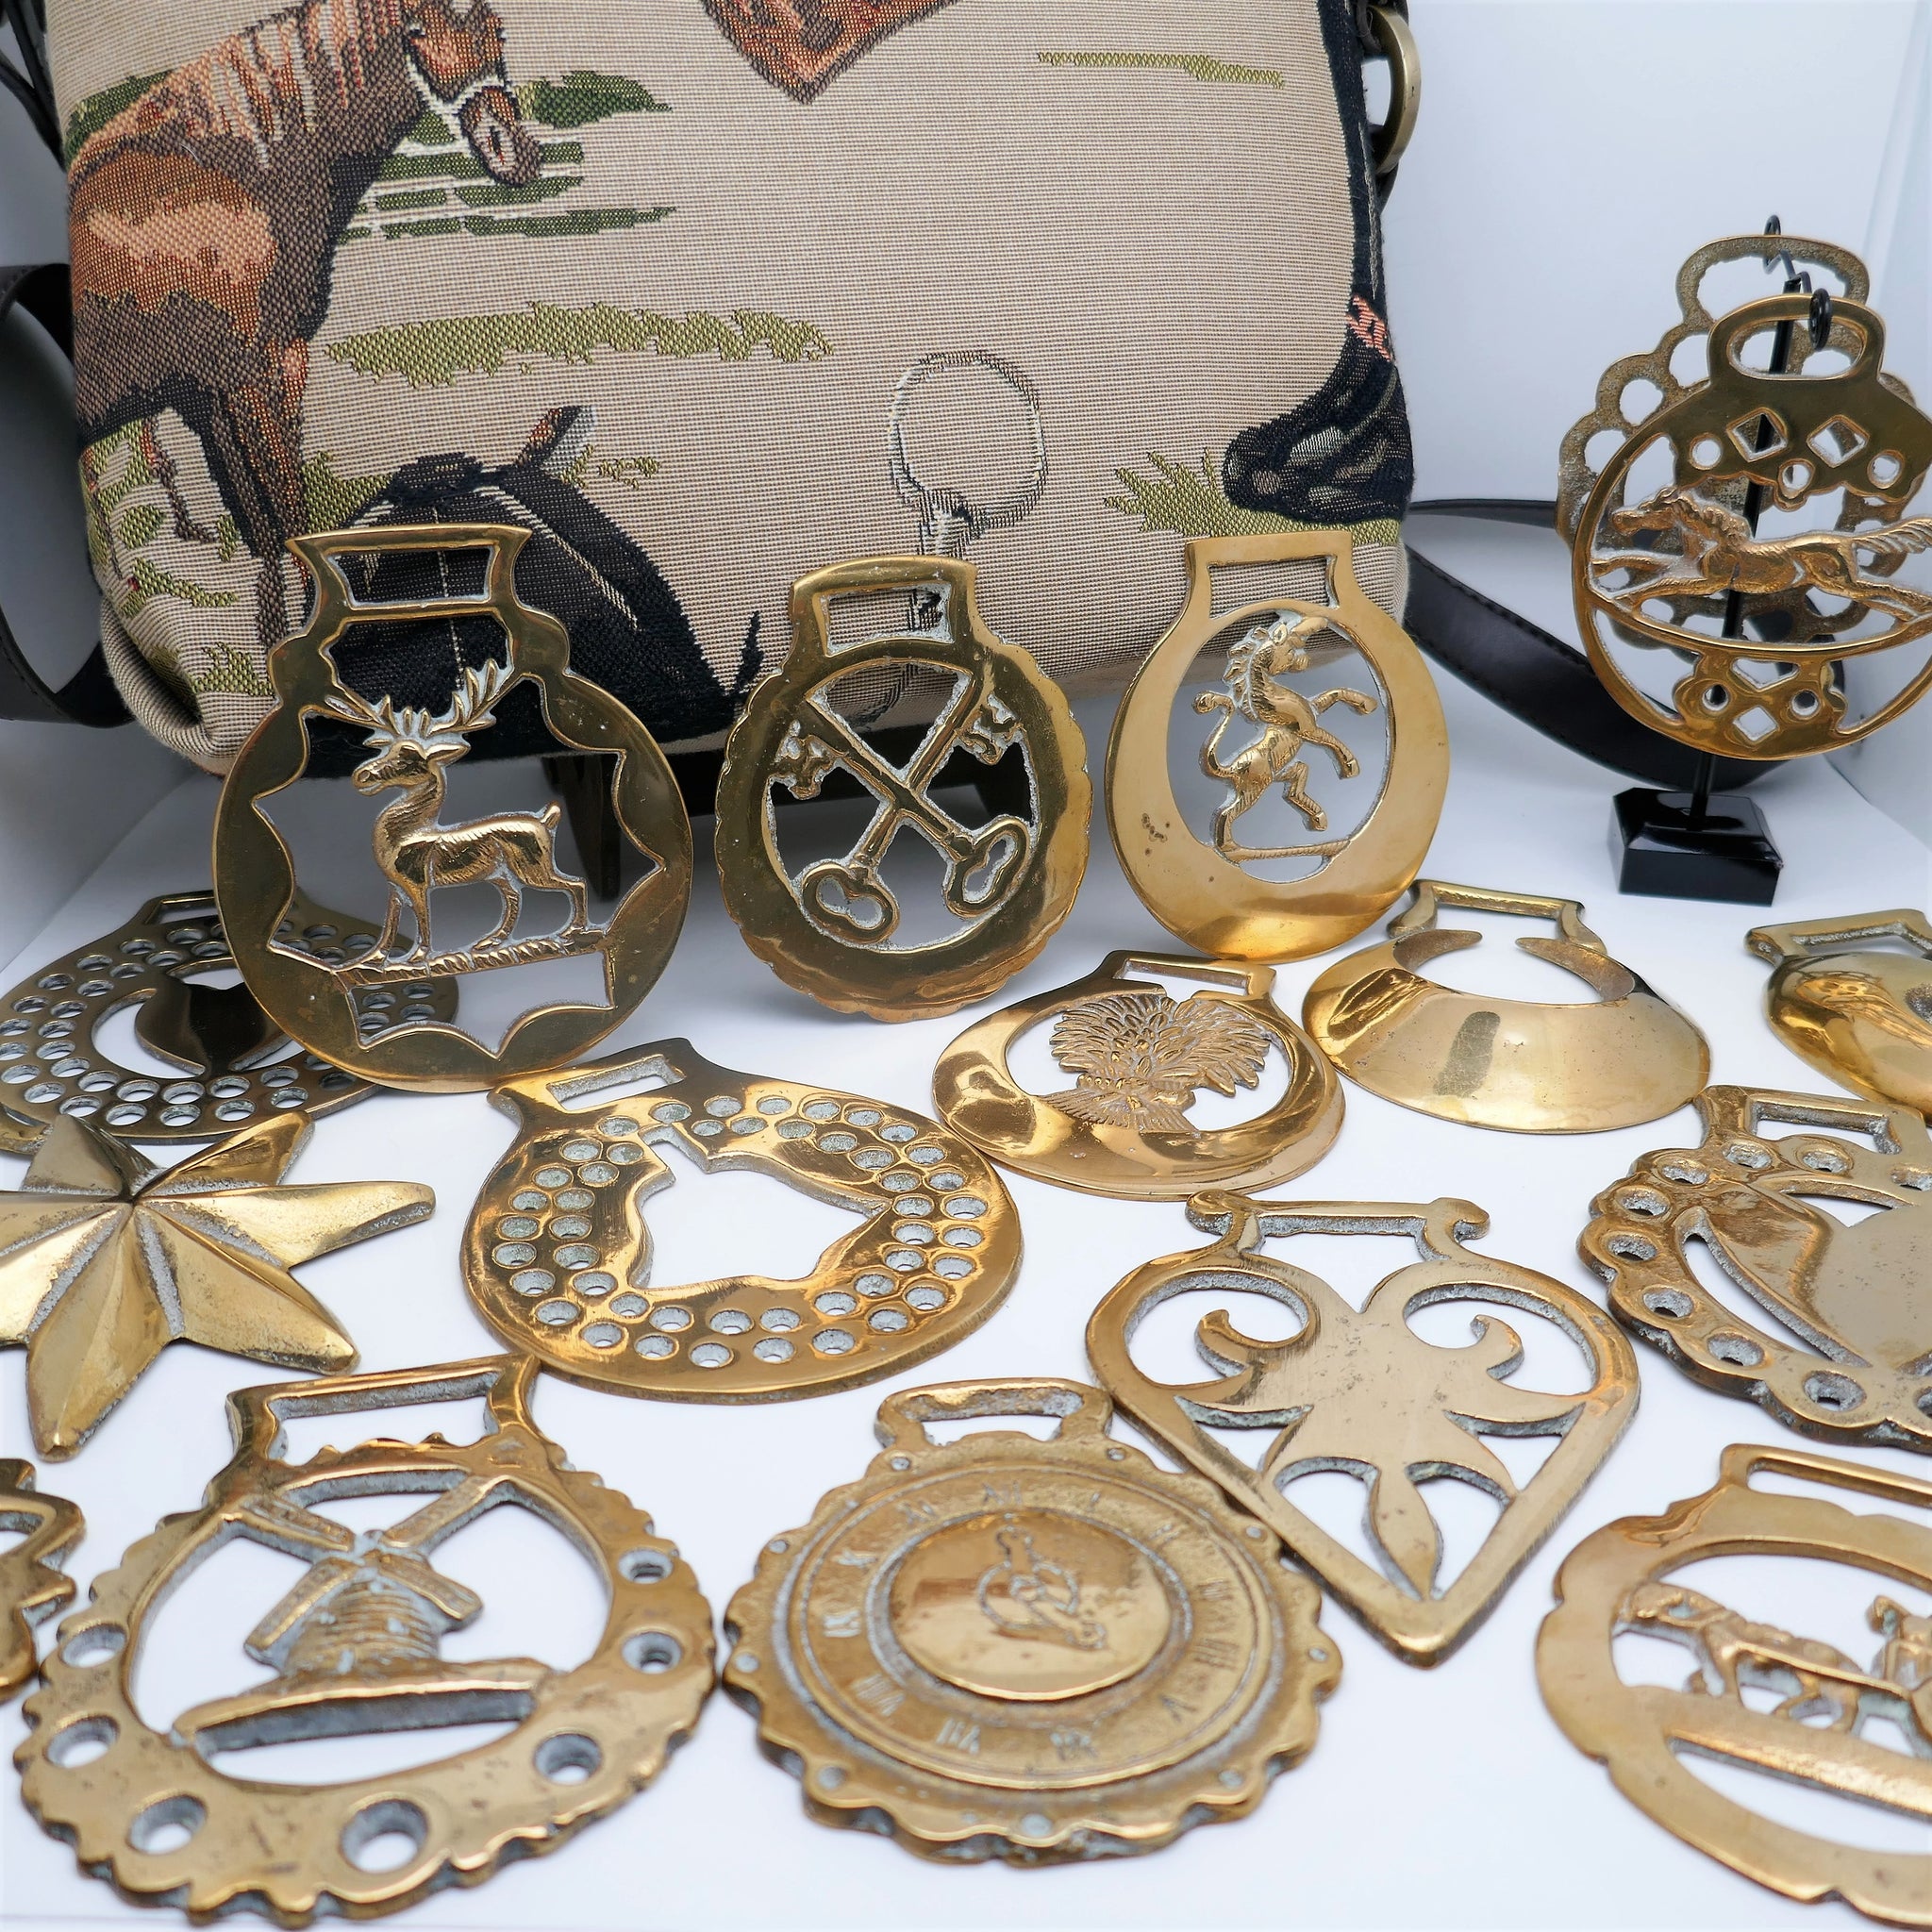 Collection of 18 Horse Fathoms medallions in vintage golden